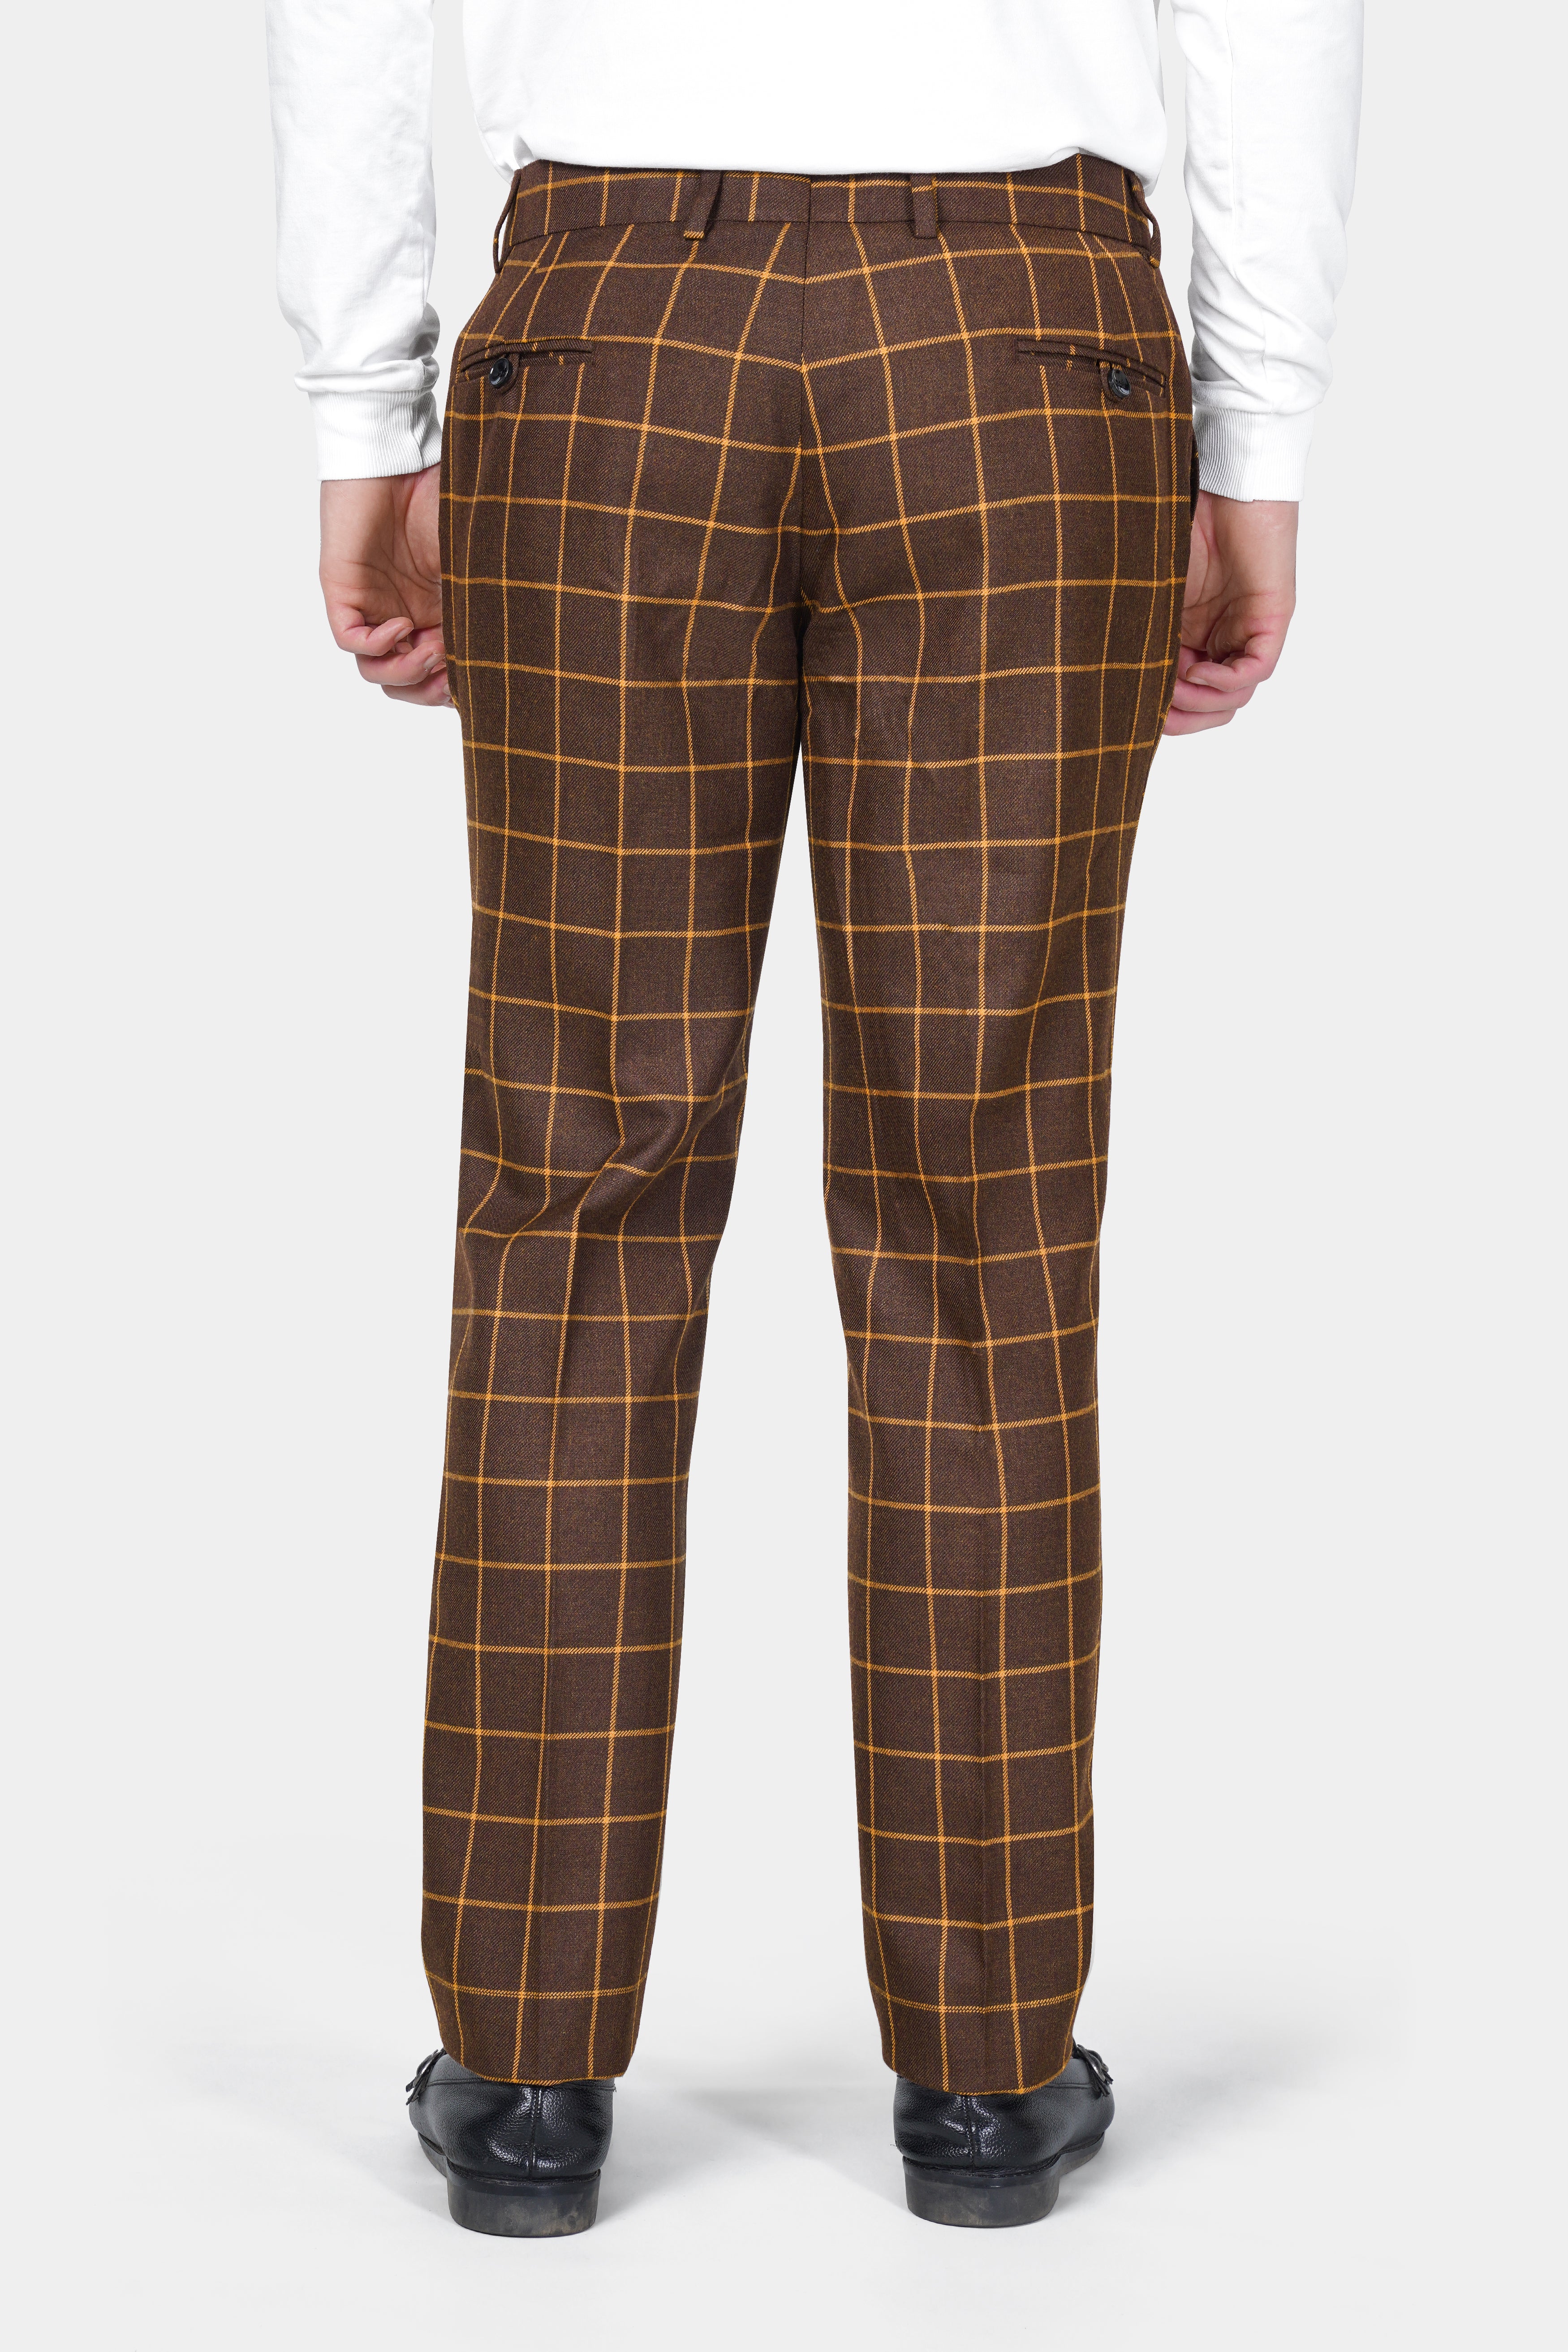 What To Wear With Plaid Pants? - 30 Men's Plaid Pants Outfit Ideas | Mens  plaid pants, Checkered pants mens, Mens casual outfits